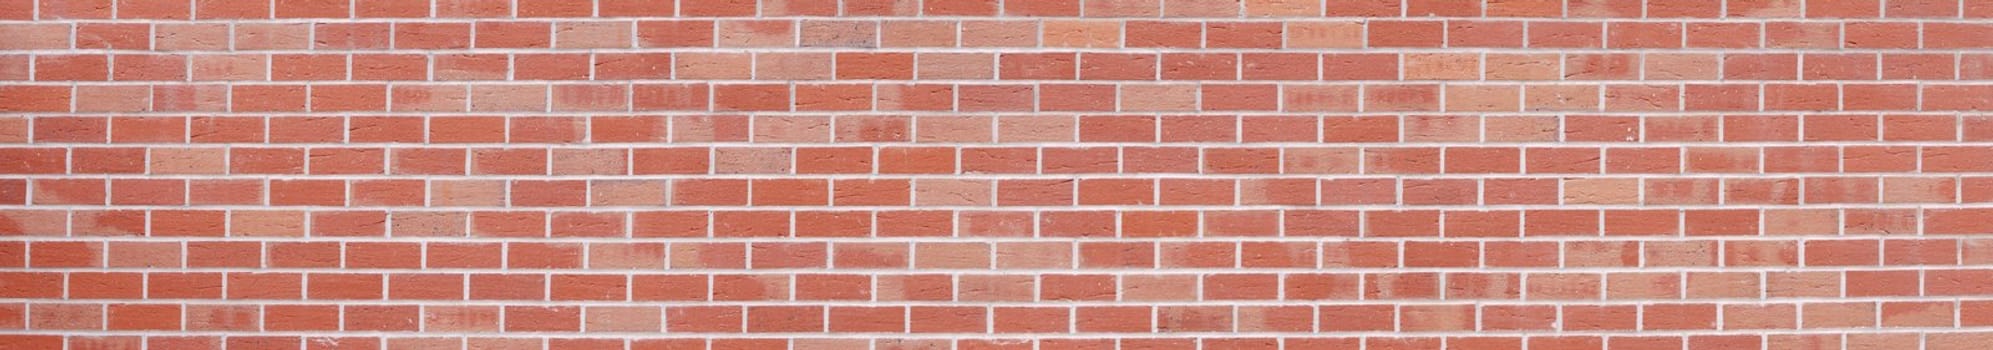 panoramic background or texture of a brick wall